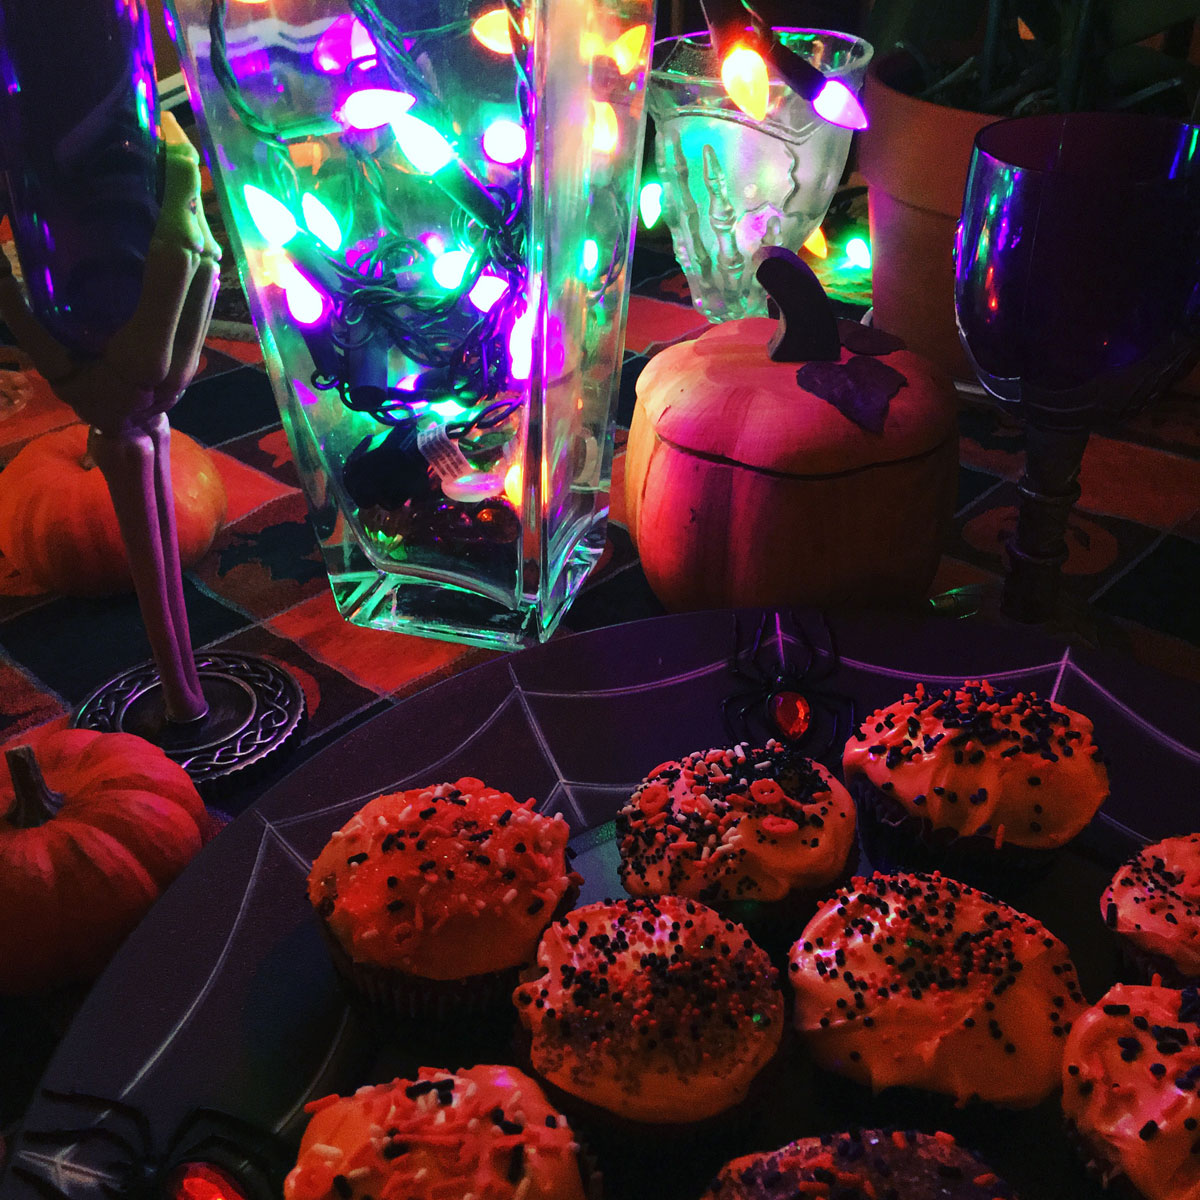 A Halloween table, ready for celebrating. (WTOP/Vlahos)